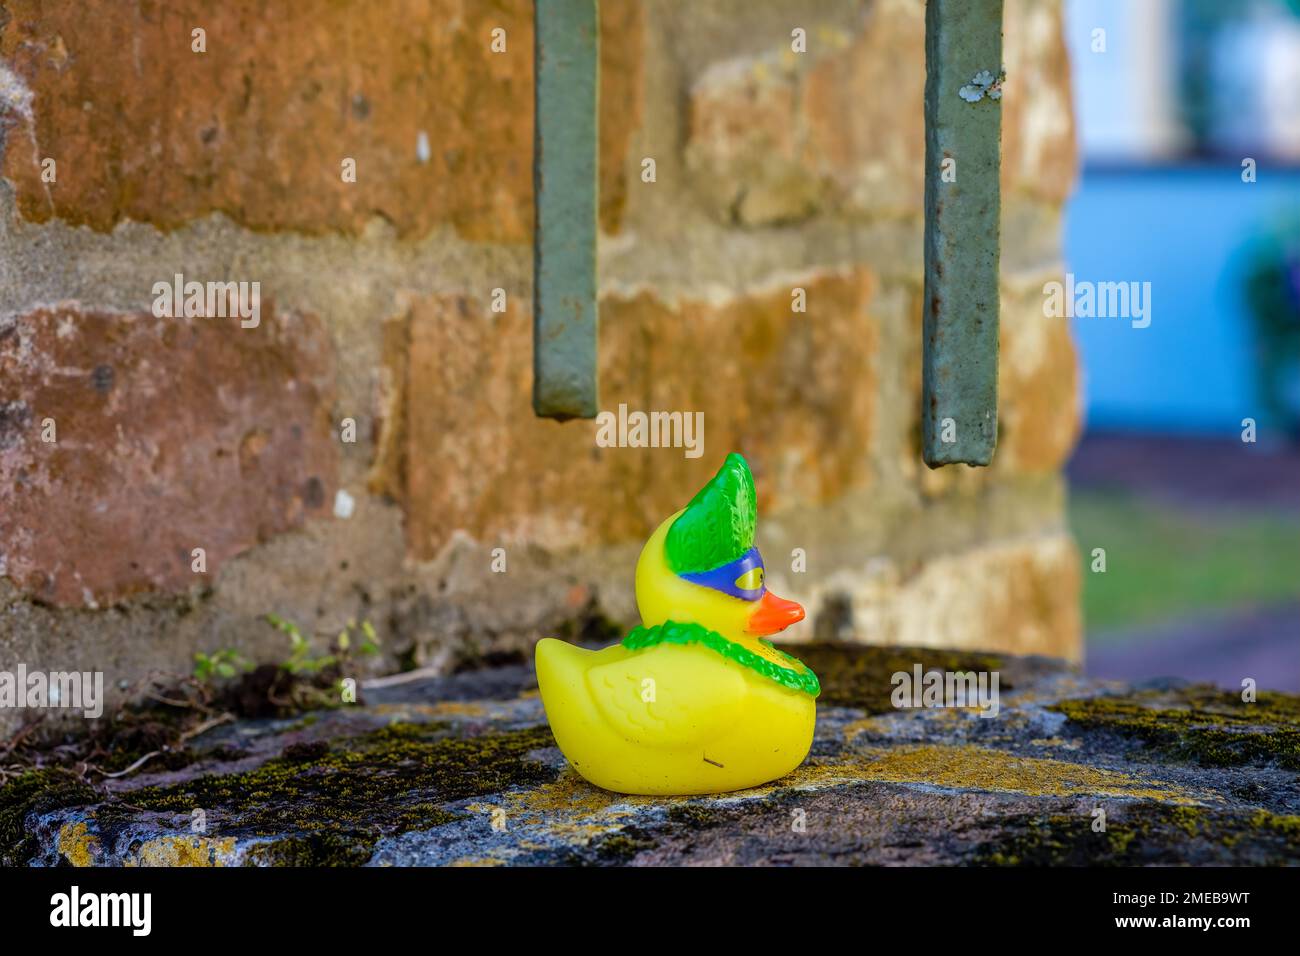 Colorful rubber duck sitting on a brick wall Stock Photo